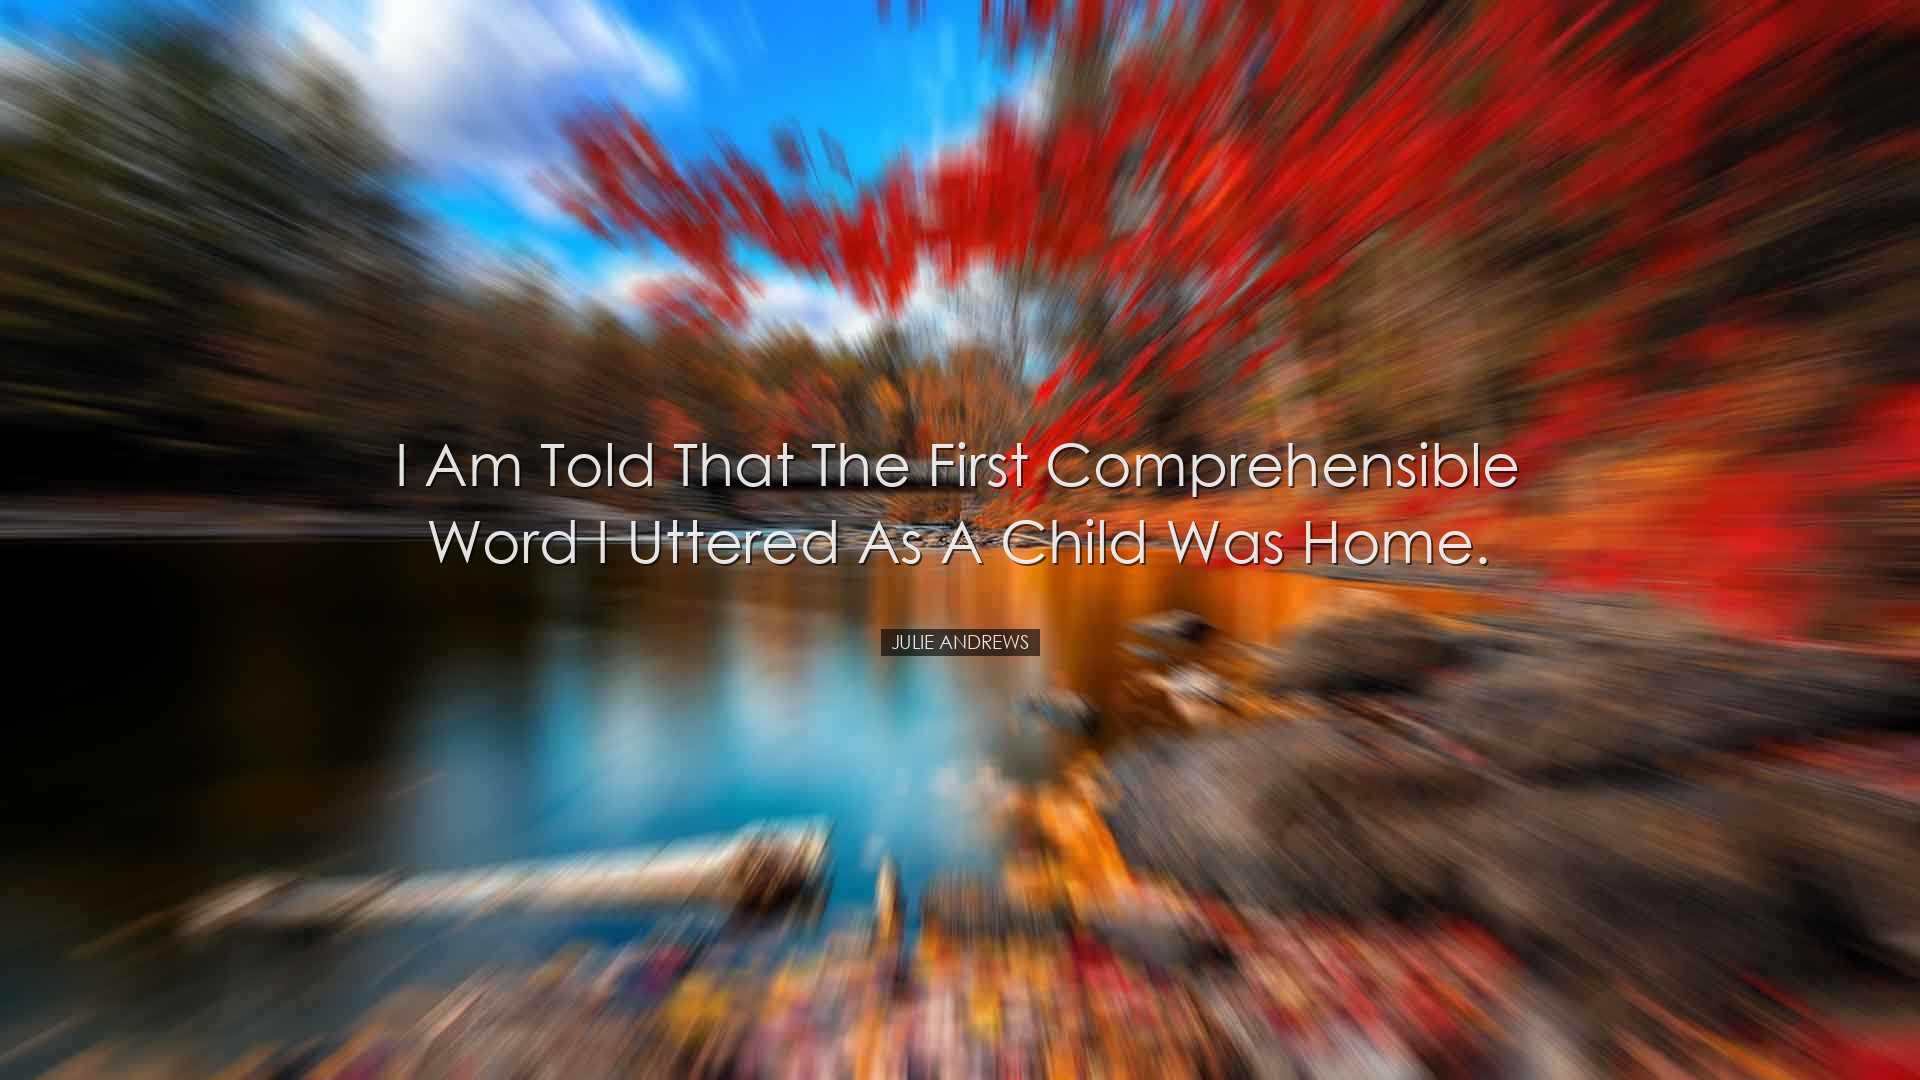 I am told that the first comprehensible word I uttered as a child